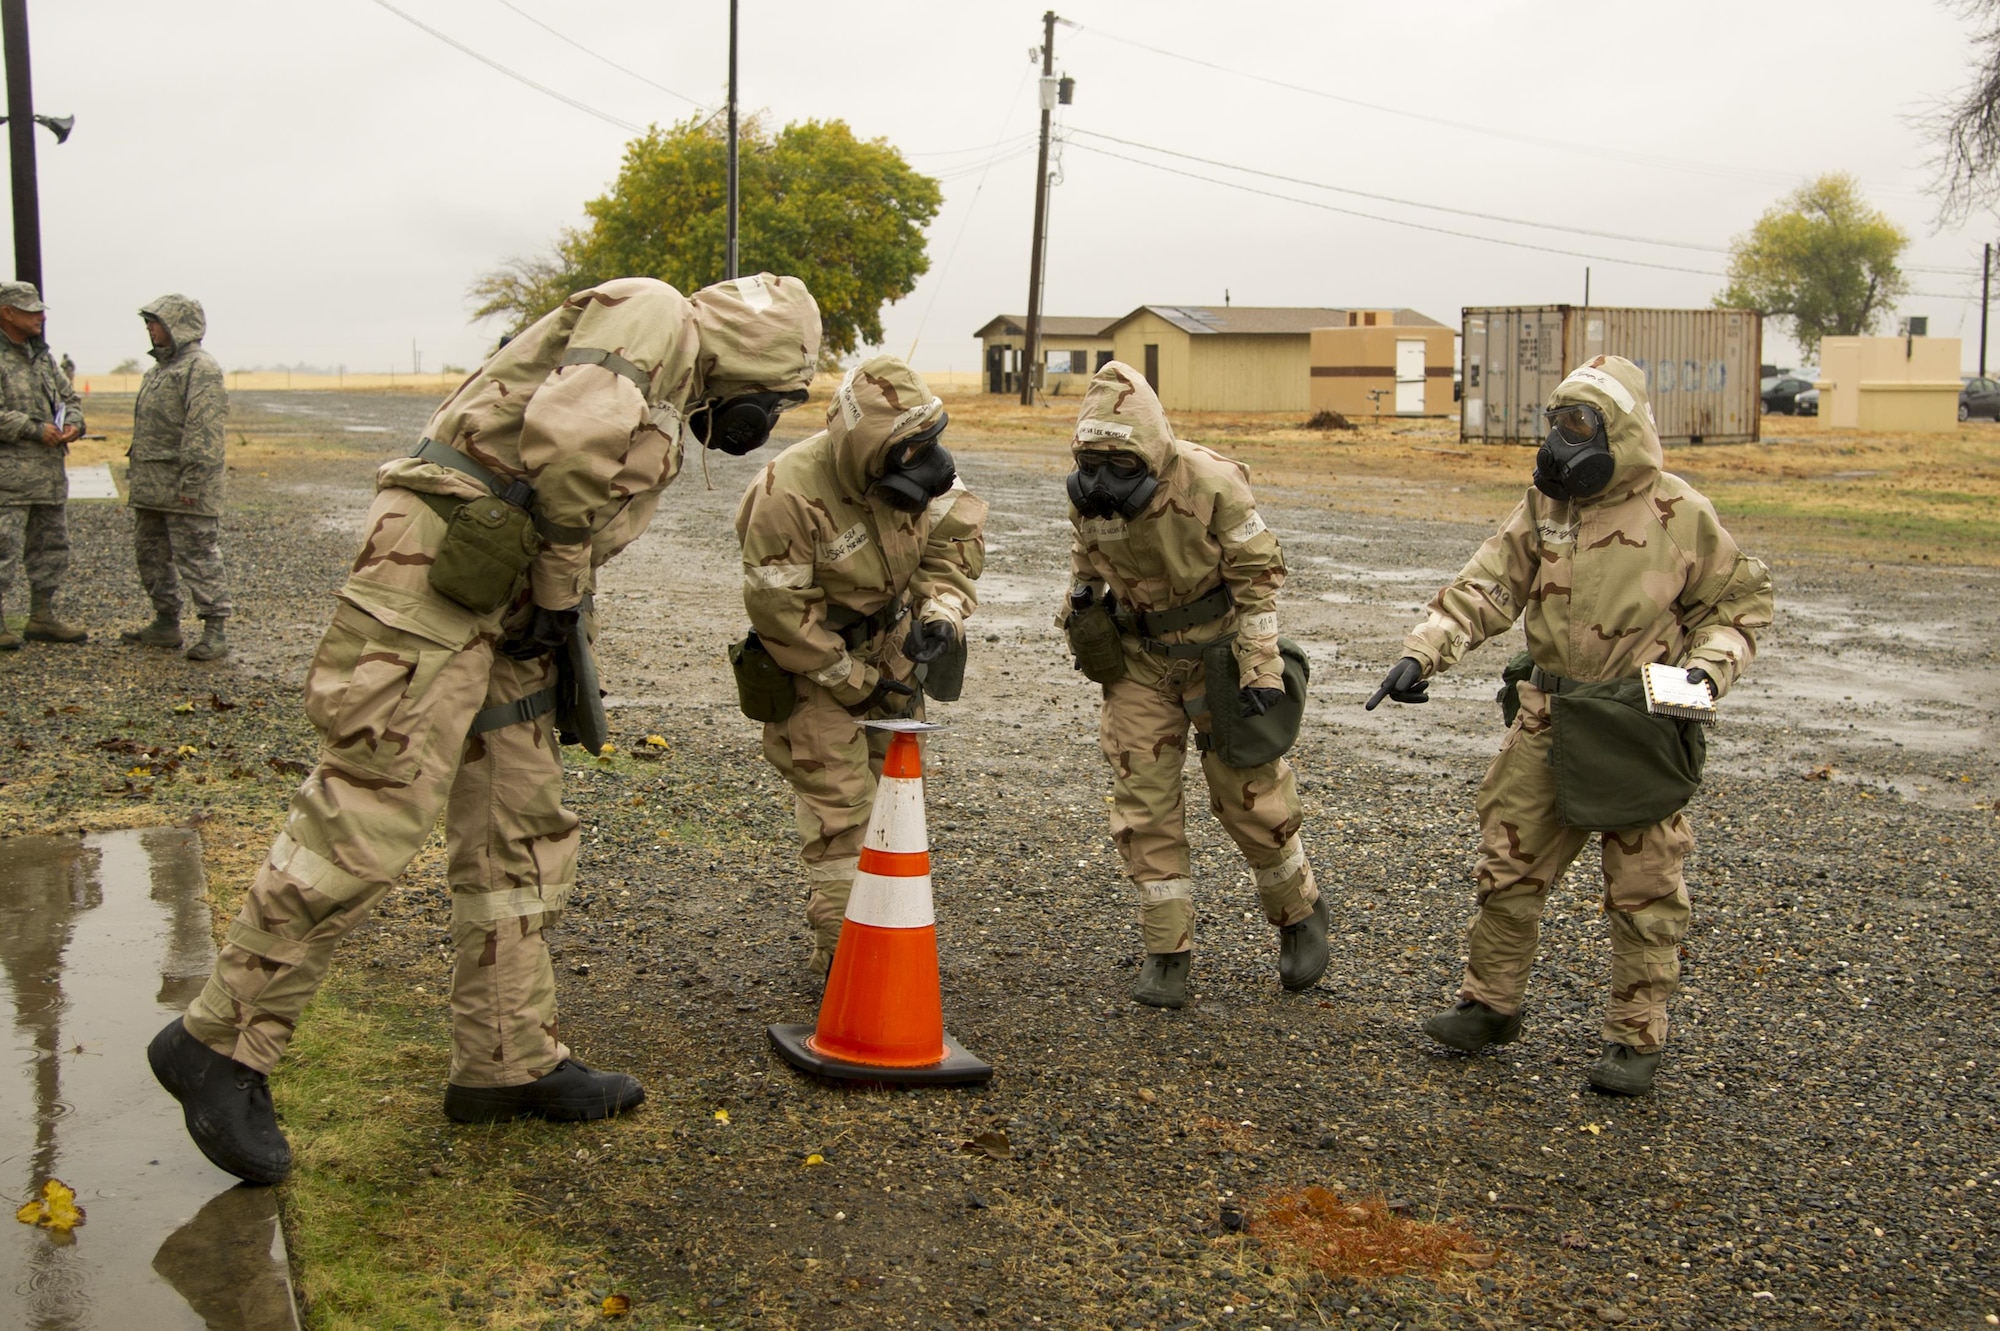 A post-attack reconnaissance team investigates simulated chemical agent detector paper during an exercise Nov. 4 at Beale Air Force Base. The PAR team looked for hazardous agents in the air, as well as unexploded ordnance on the ground. (U.S. Air Force photo by Senior Airman Tara R. Abrahams)